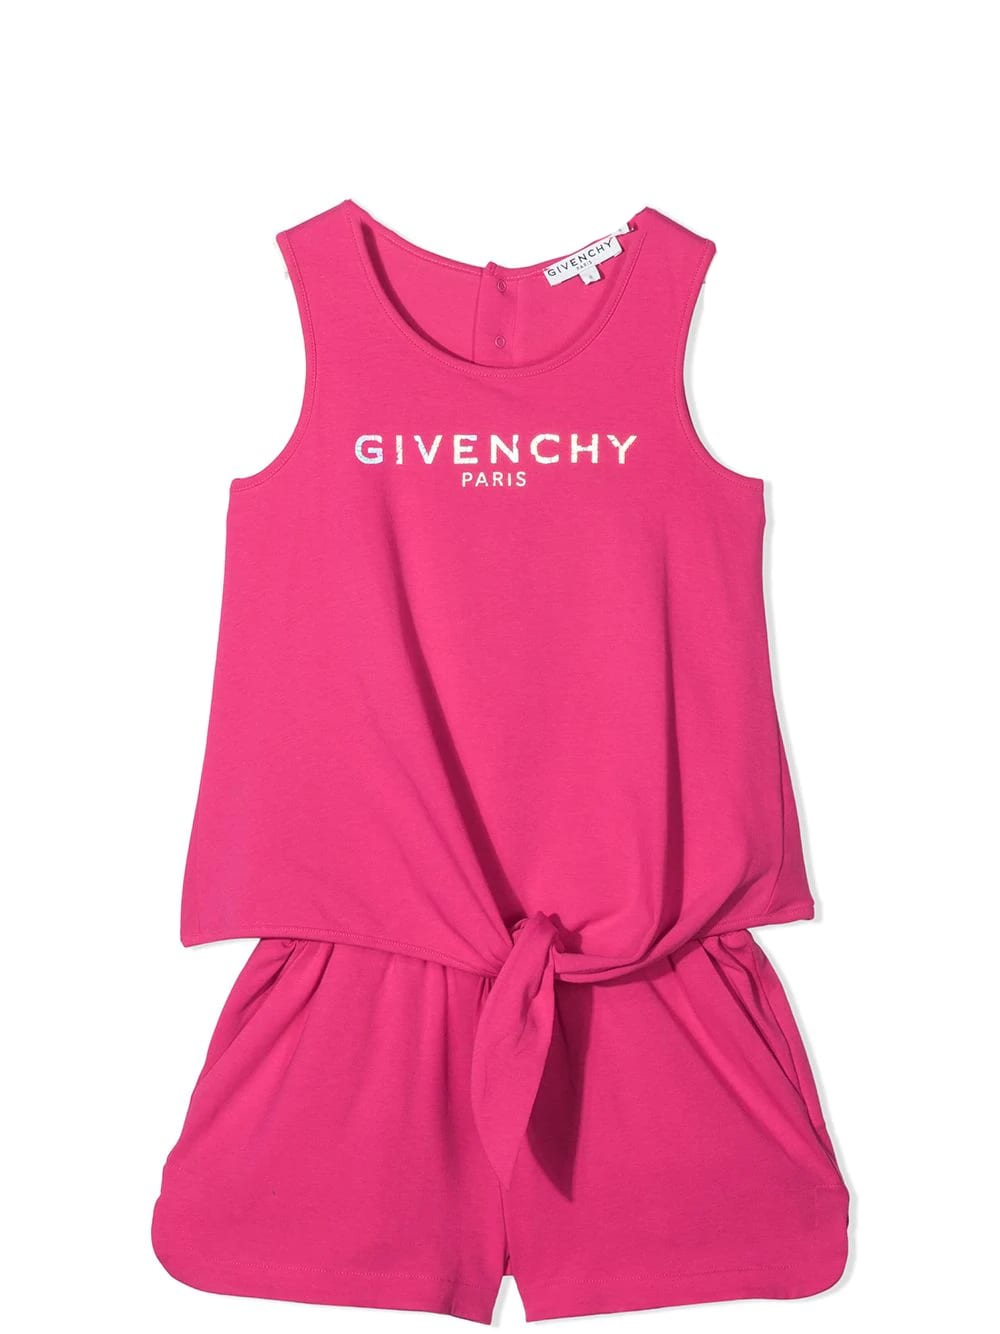 GIVENCHY TWO PIECE COMPLETE WITH PRINT,H14112 483